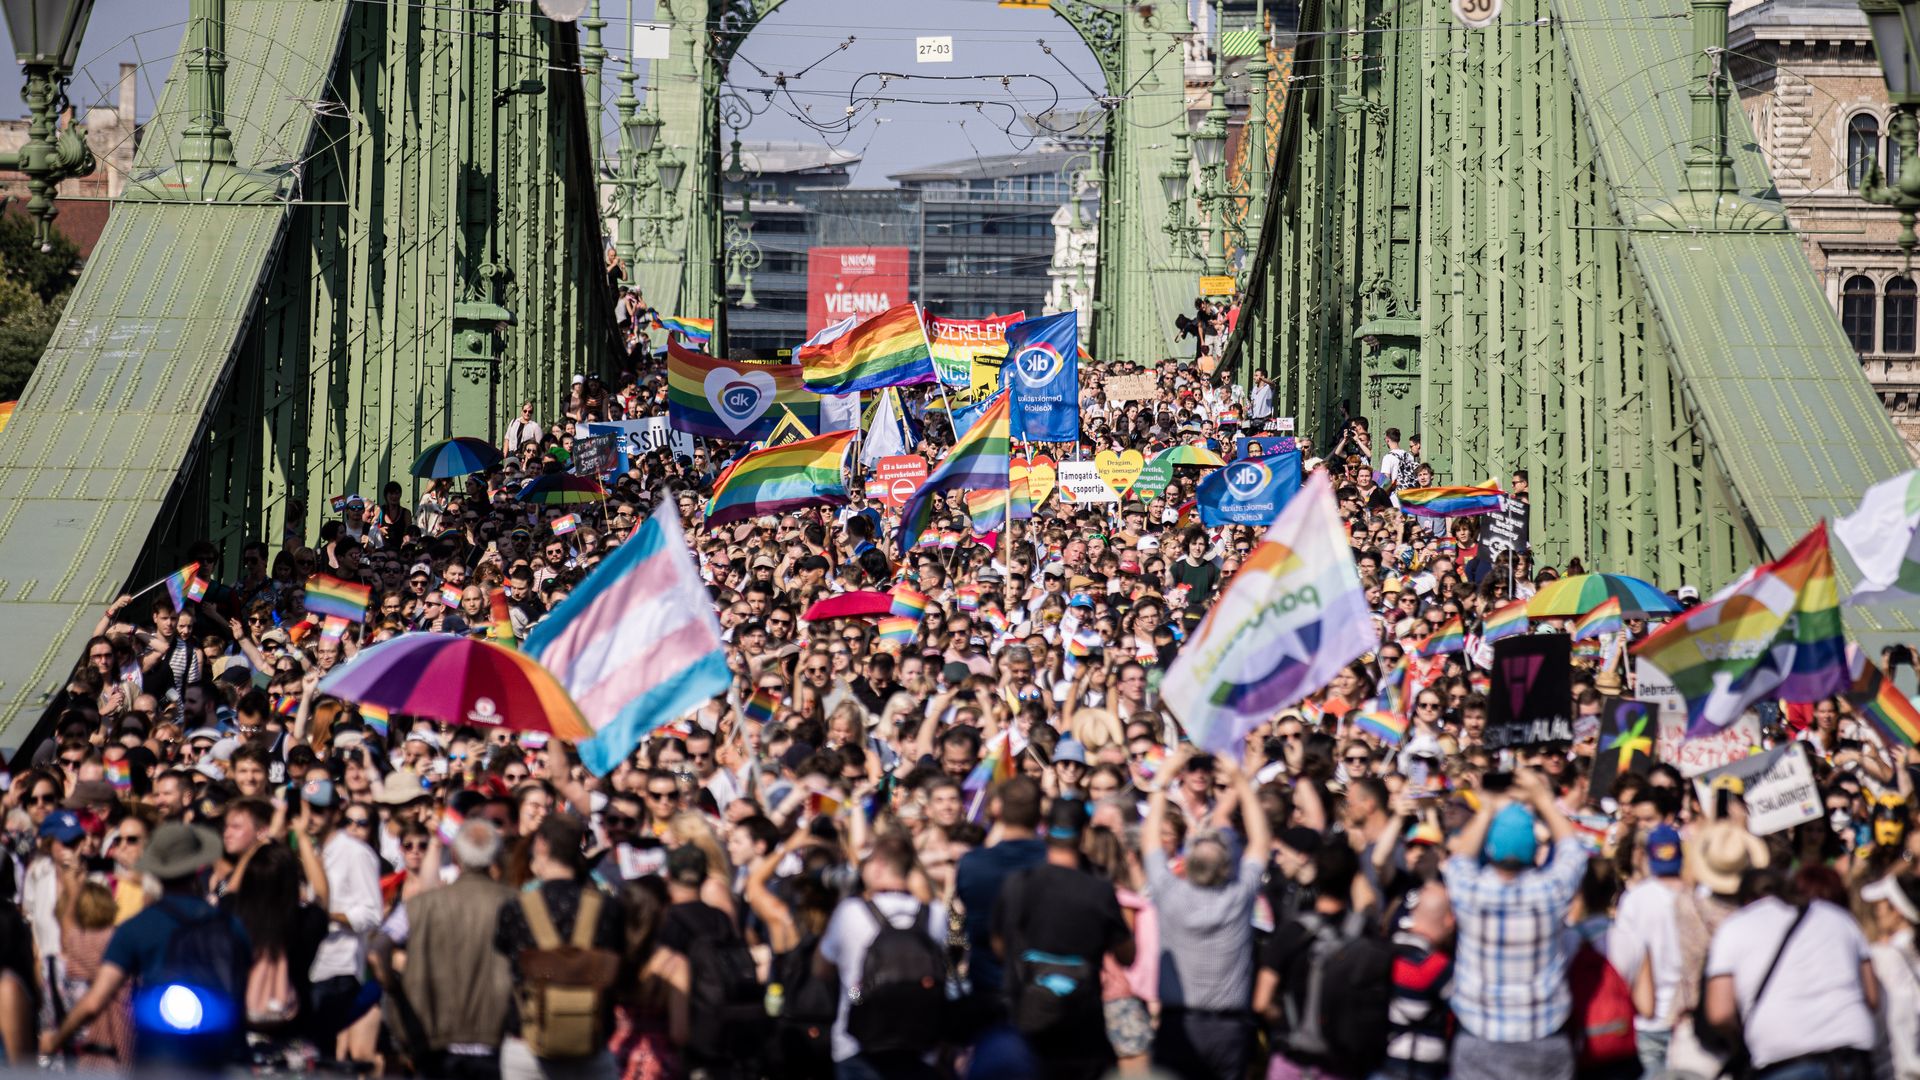 Demonstrators march on Liberty Bridge during the annual Pride parade in Budapest, Hungary, on Saturday, July 24, 2021.